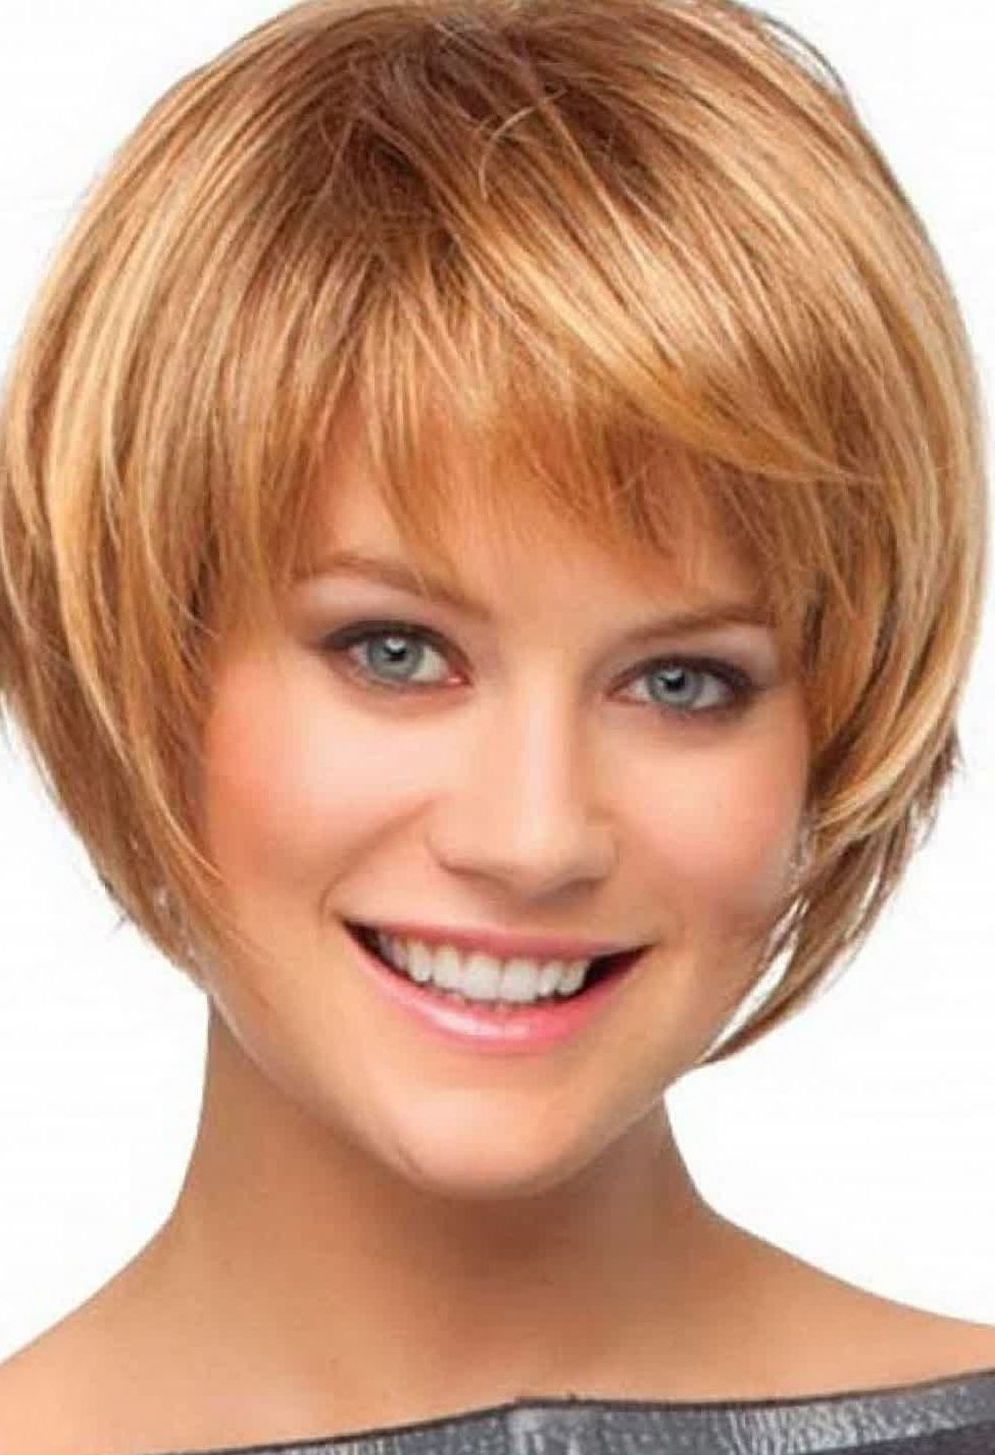 Pin On Short Hair Cuts/styles/colors Pertaining To Hort Bob Haircuts With Bangs (View 2 of 20)